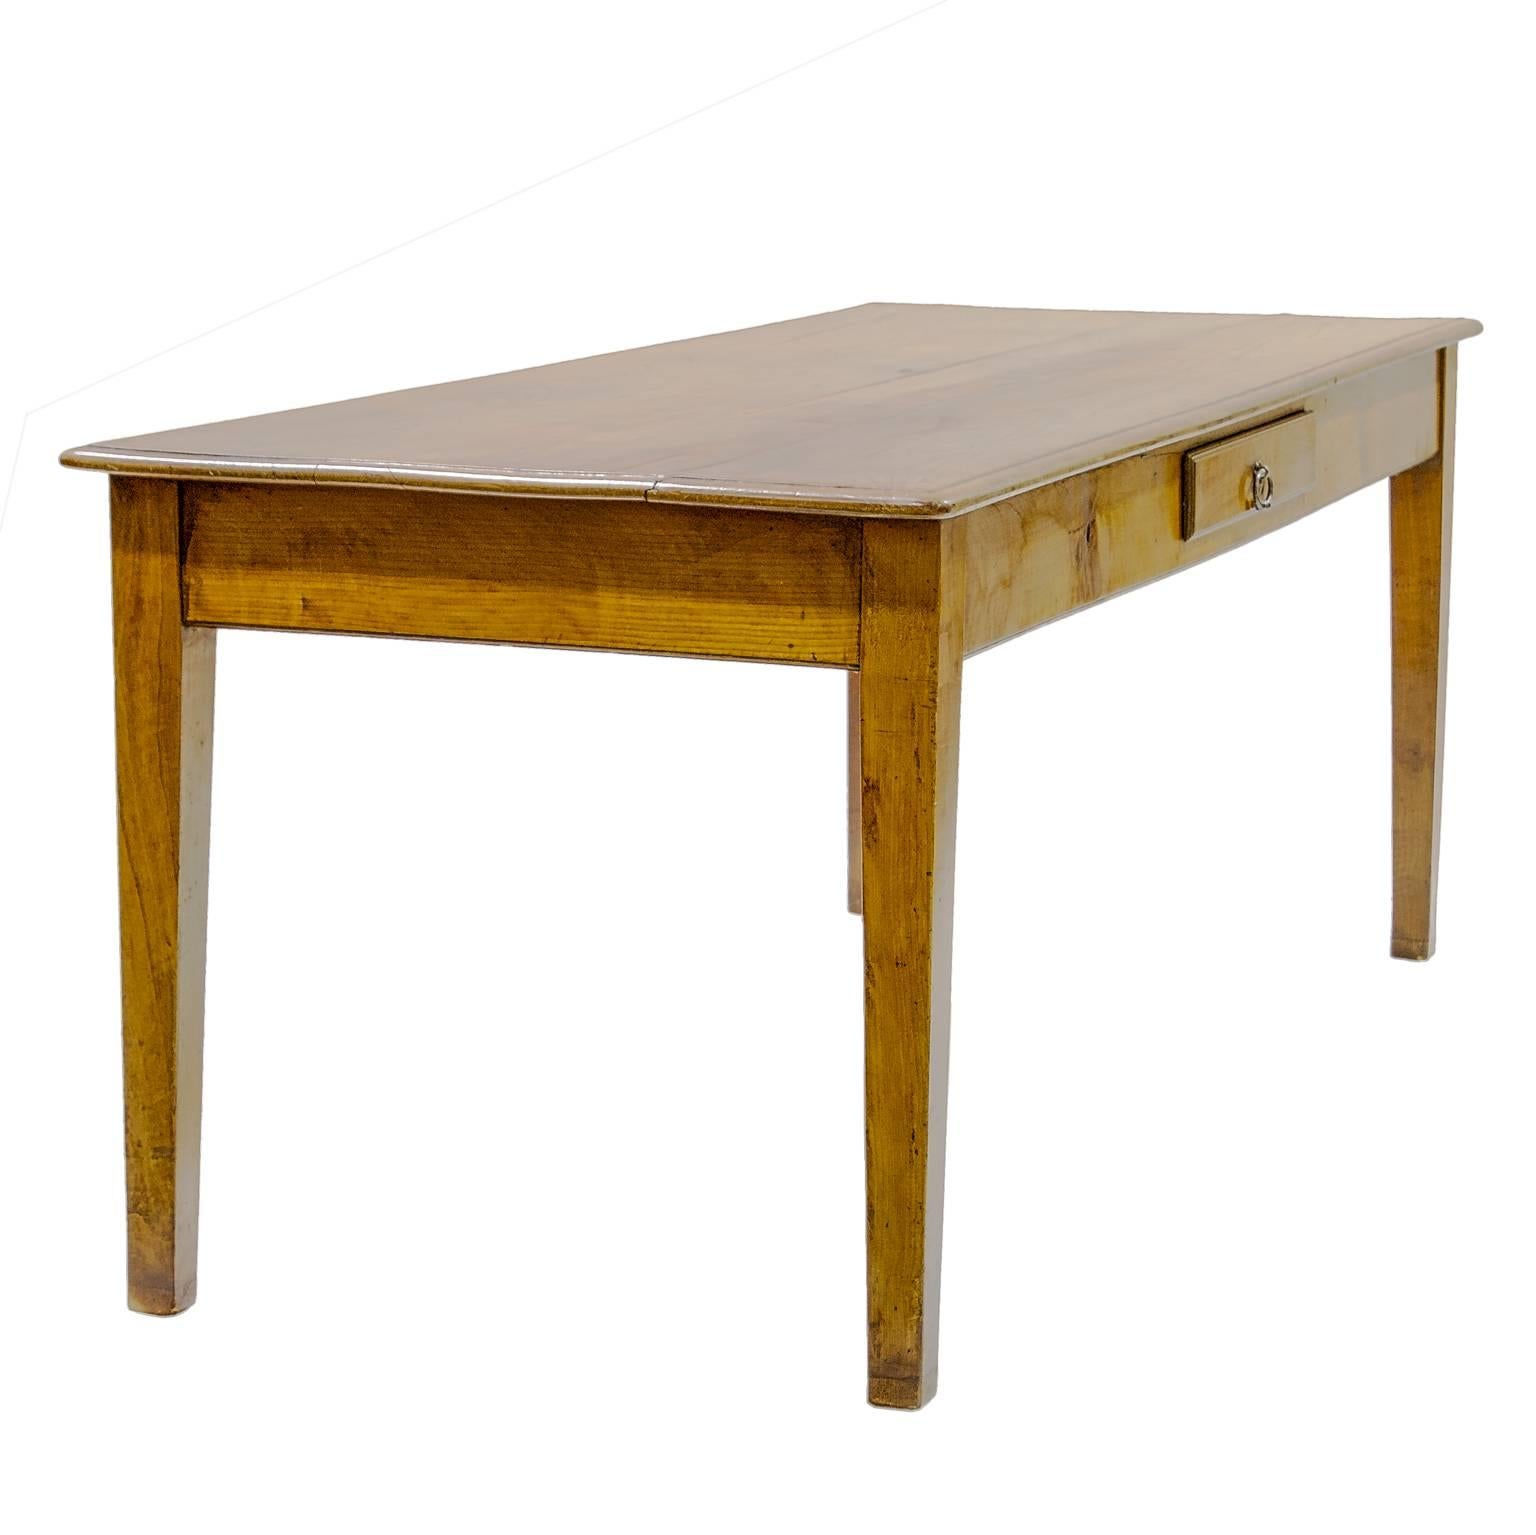 Early 19th Century 19th Century French Farm Table Made from Elmwood